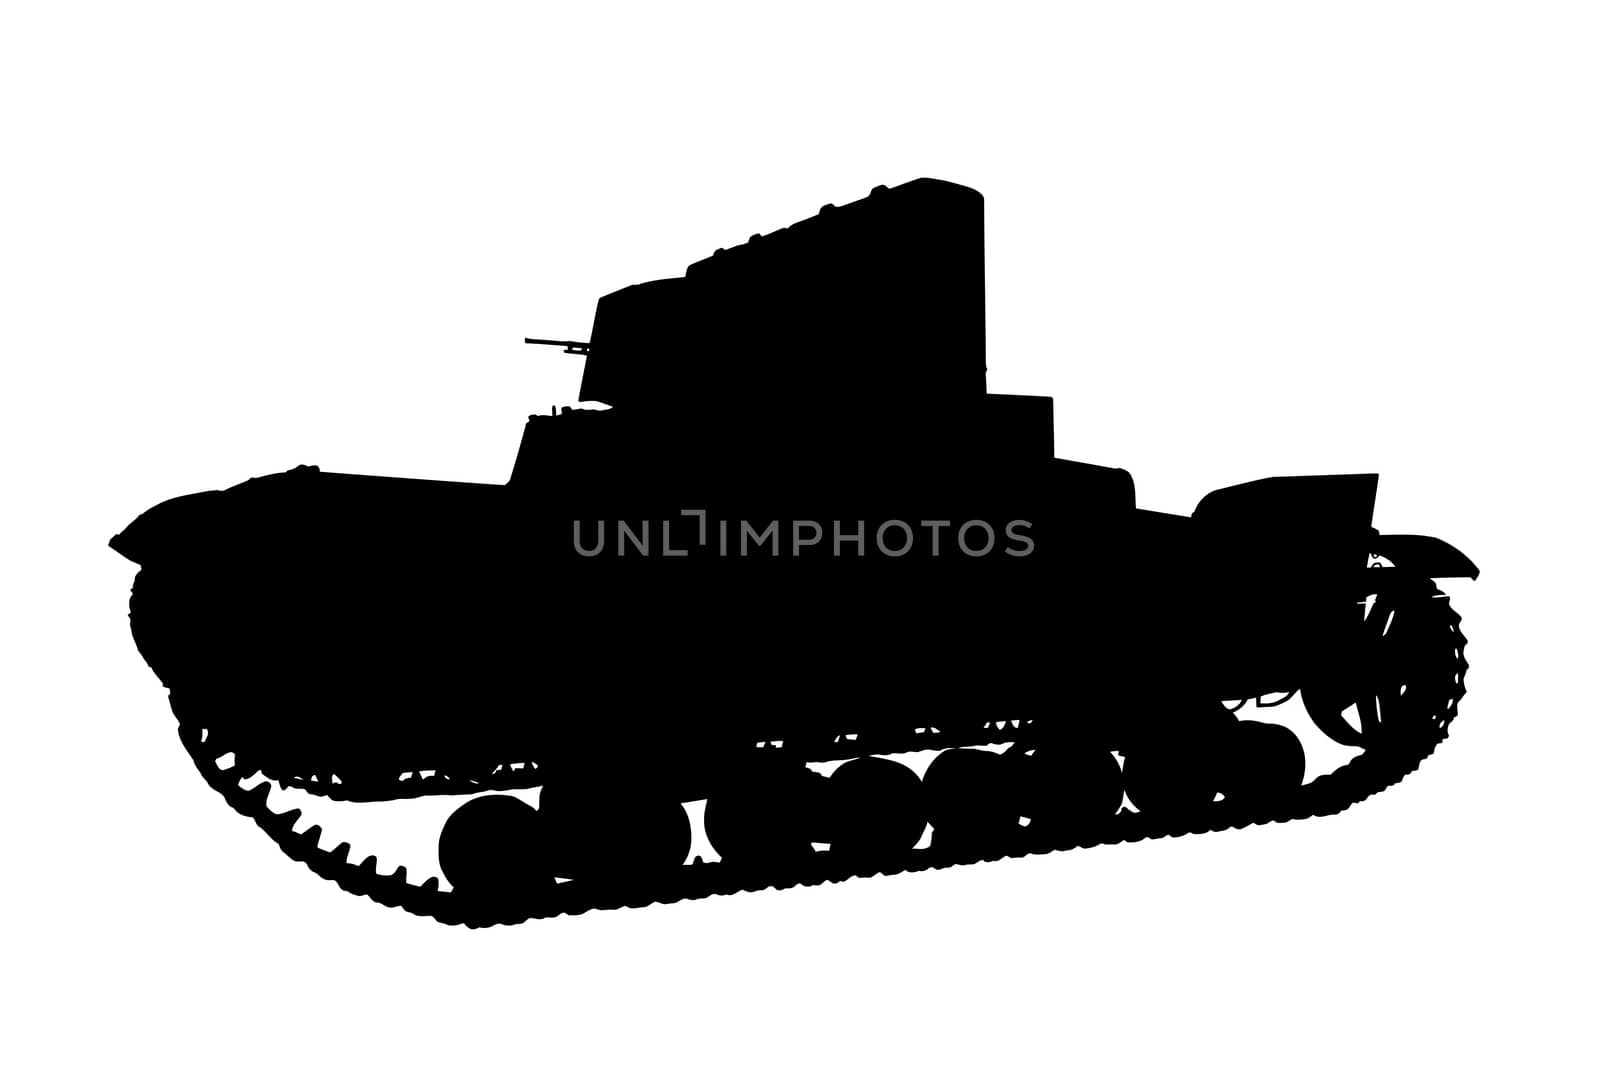 The tank in the foreground, isolated on white background.